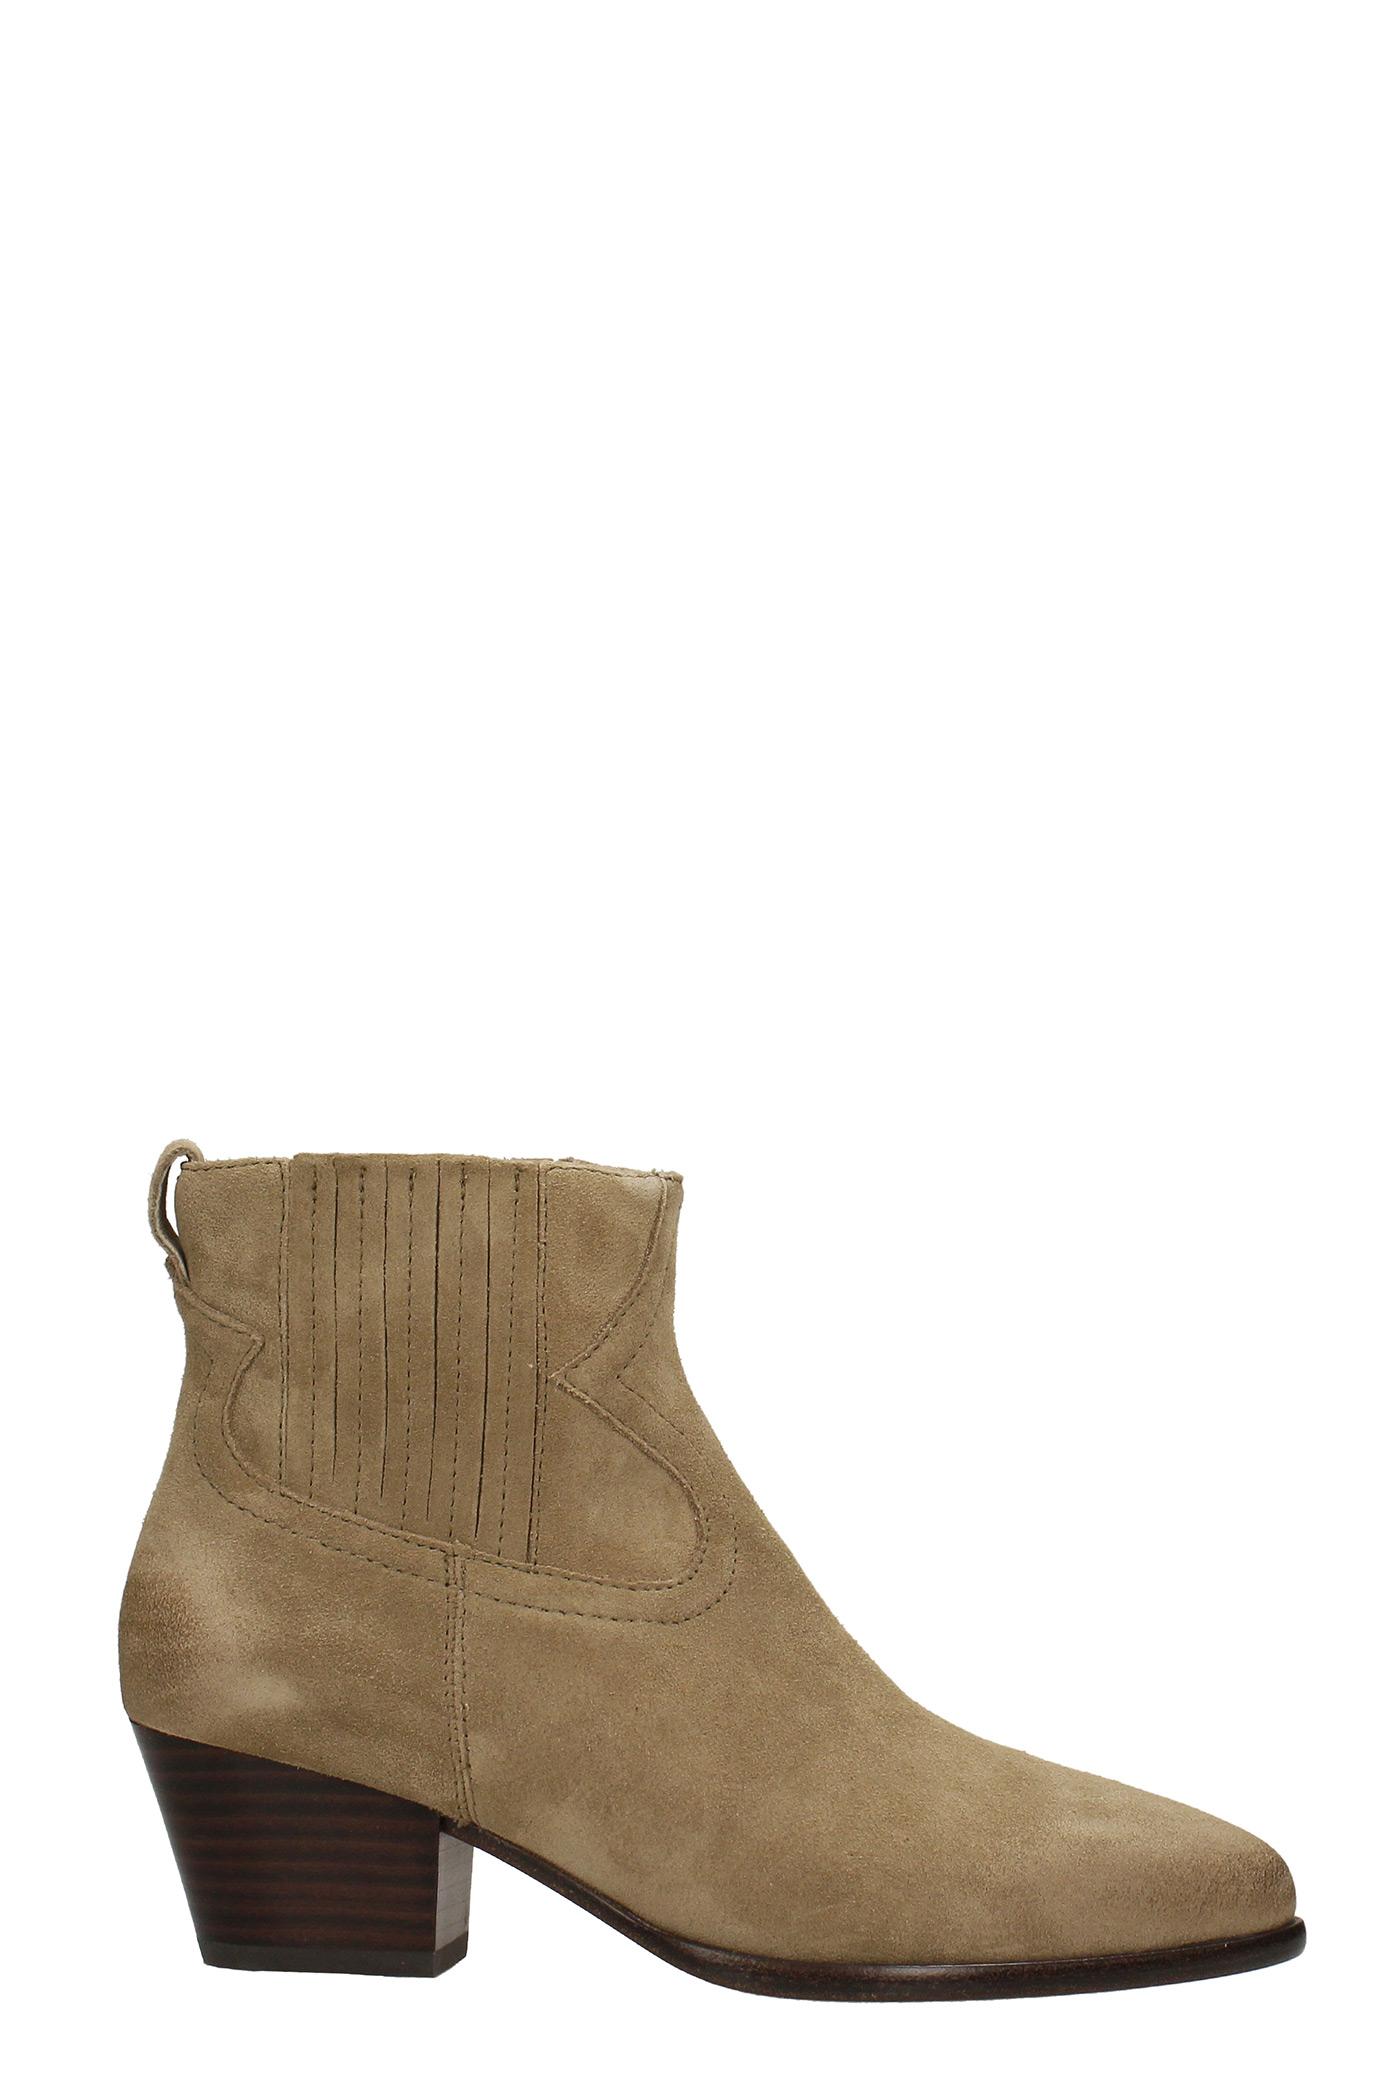 Ash Harper Texan Ankle Boots In Suede in Natural | Lyst